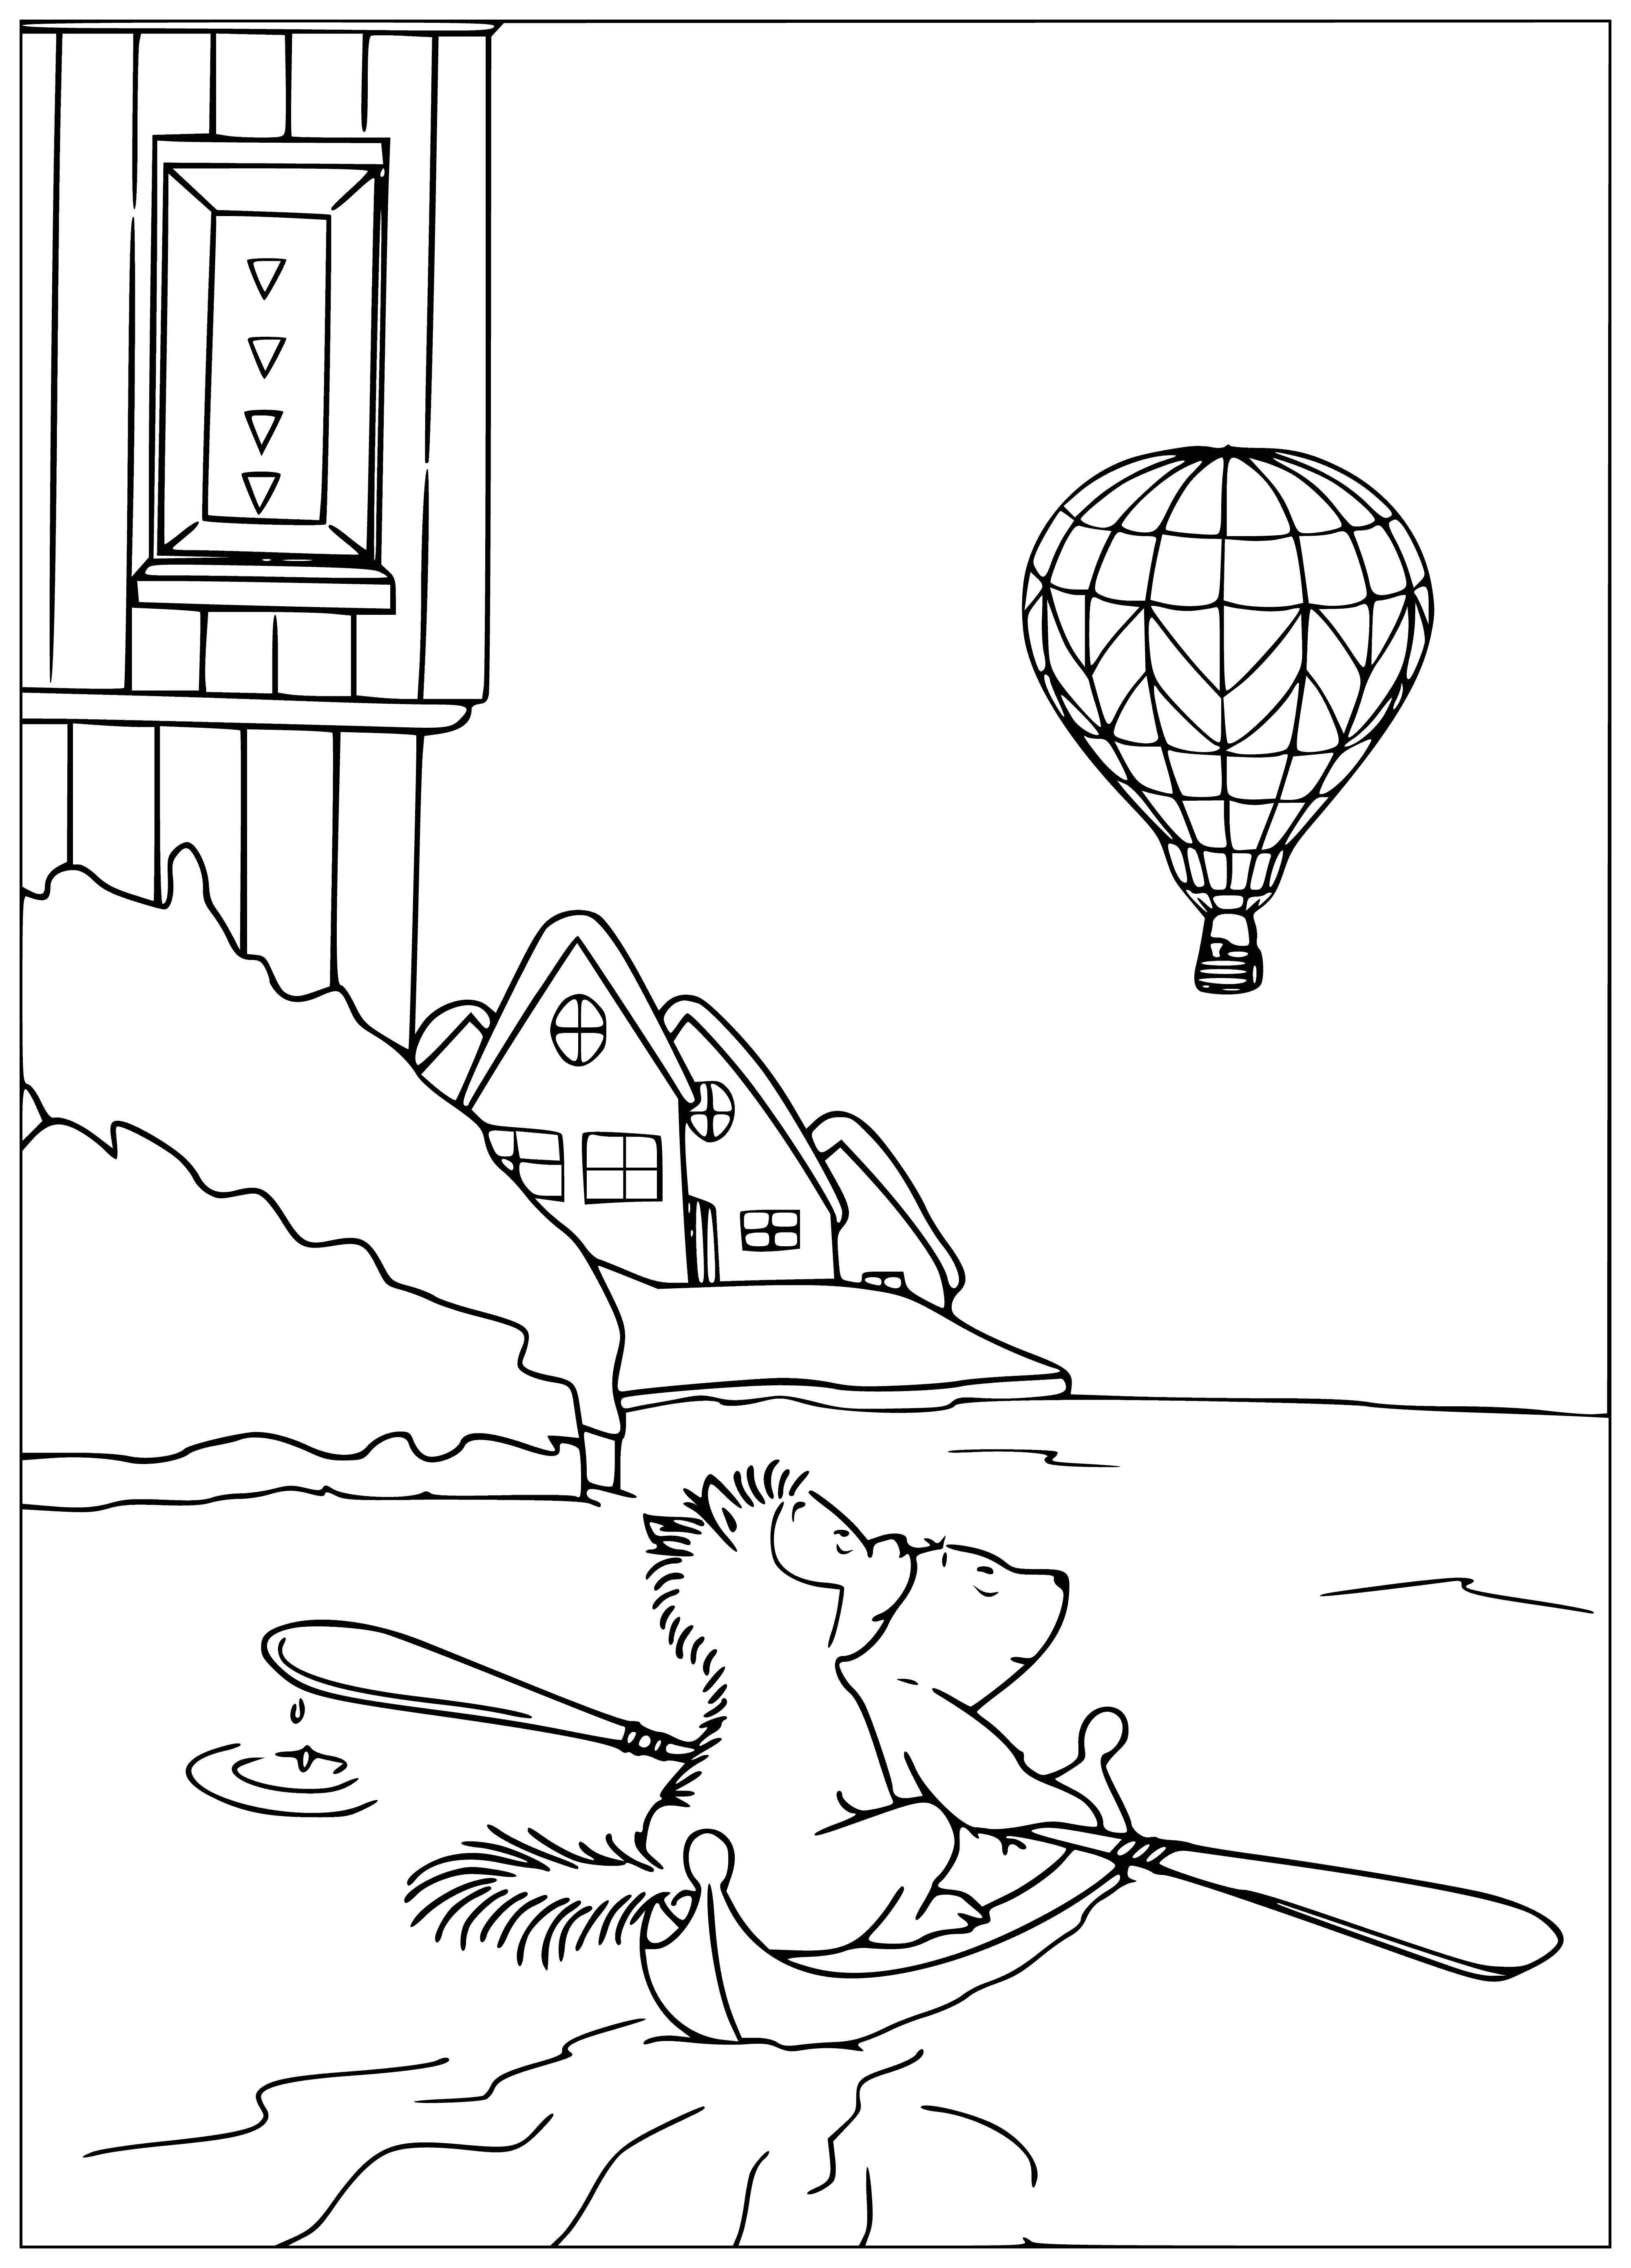 In the boat coloring page